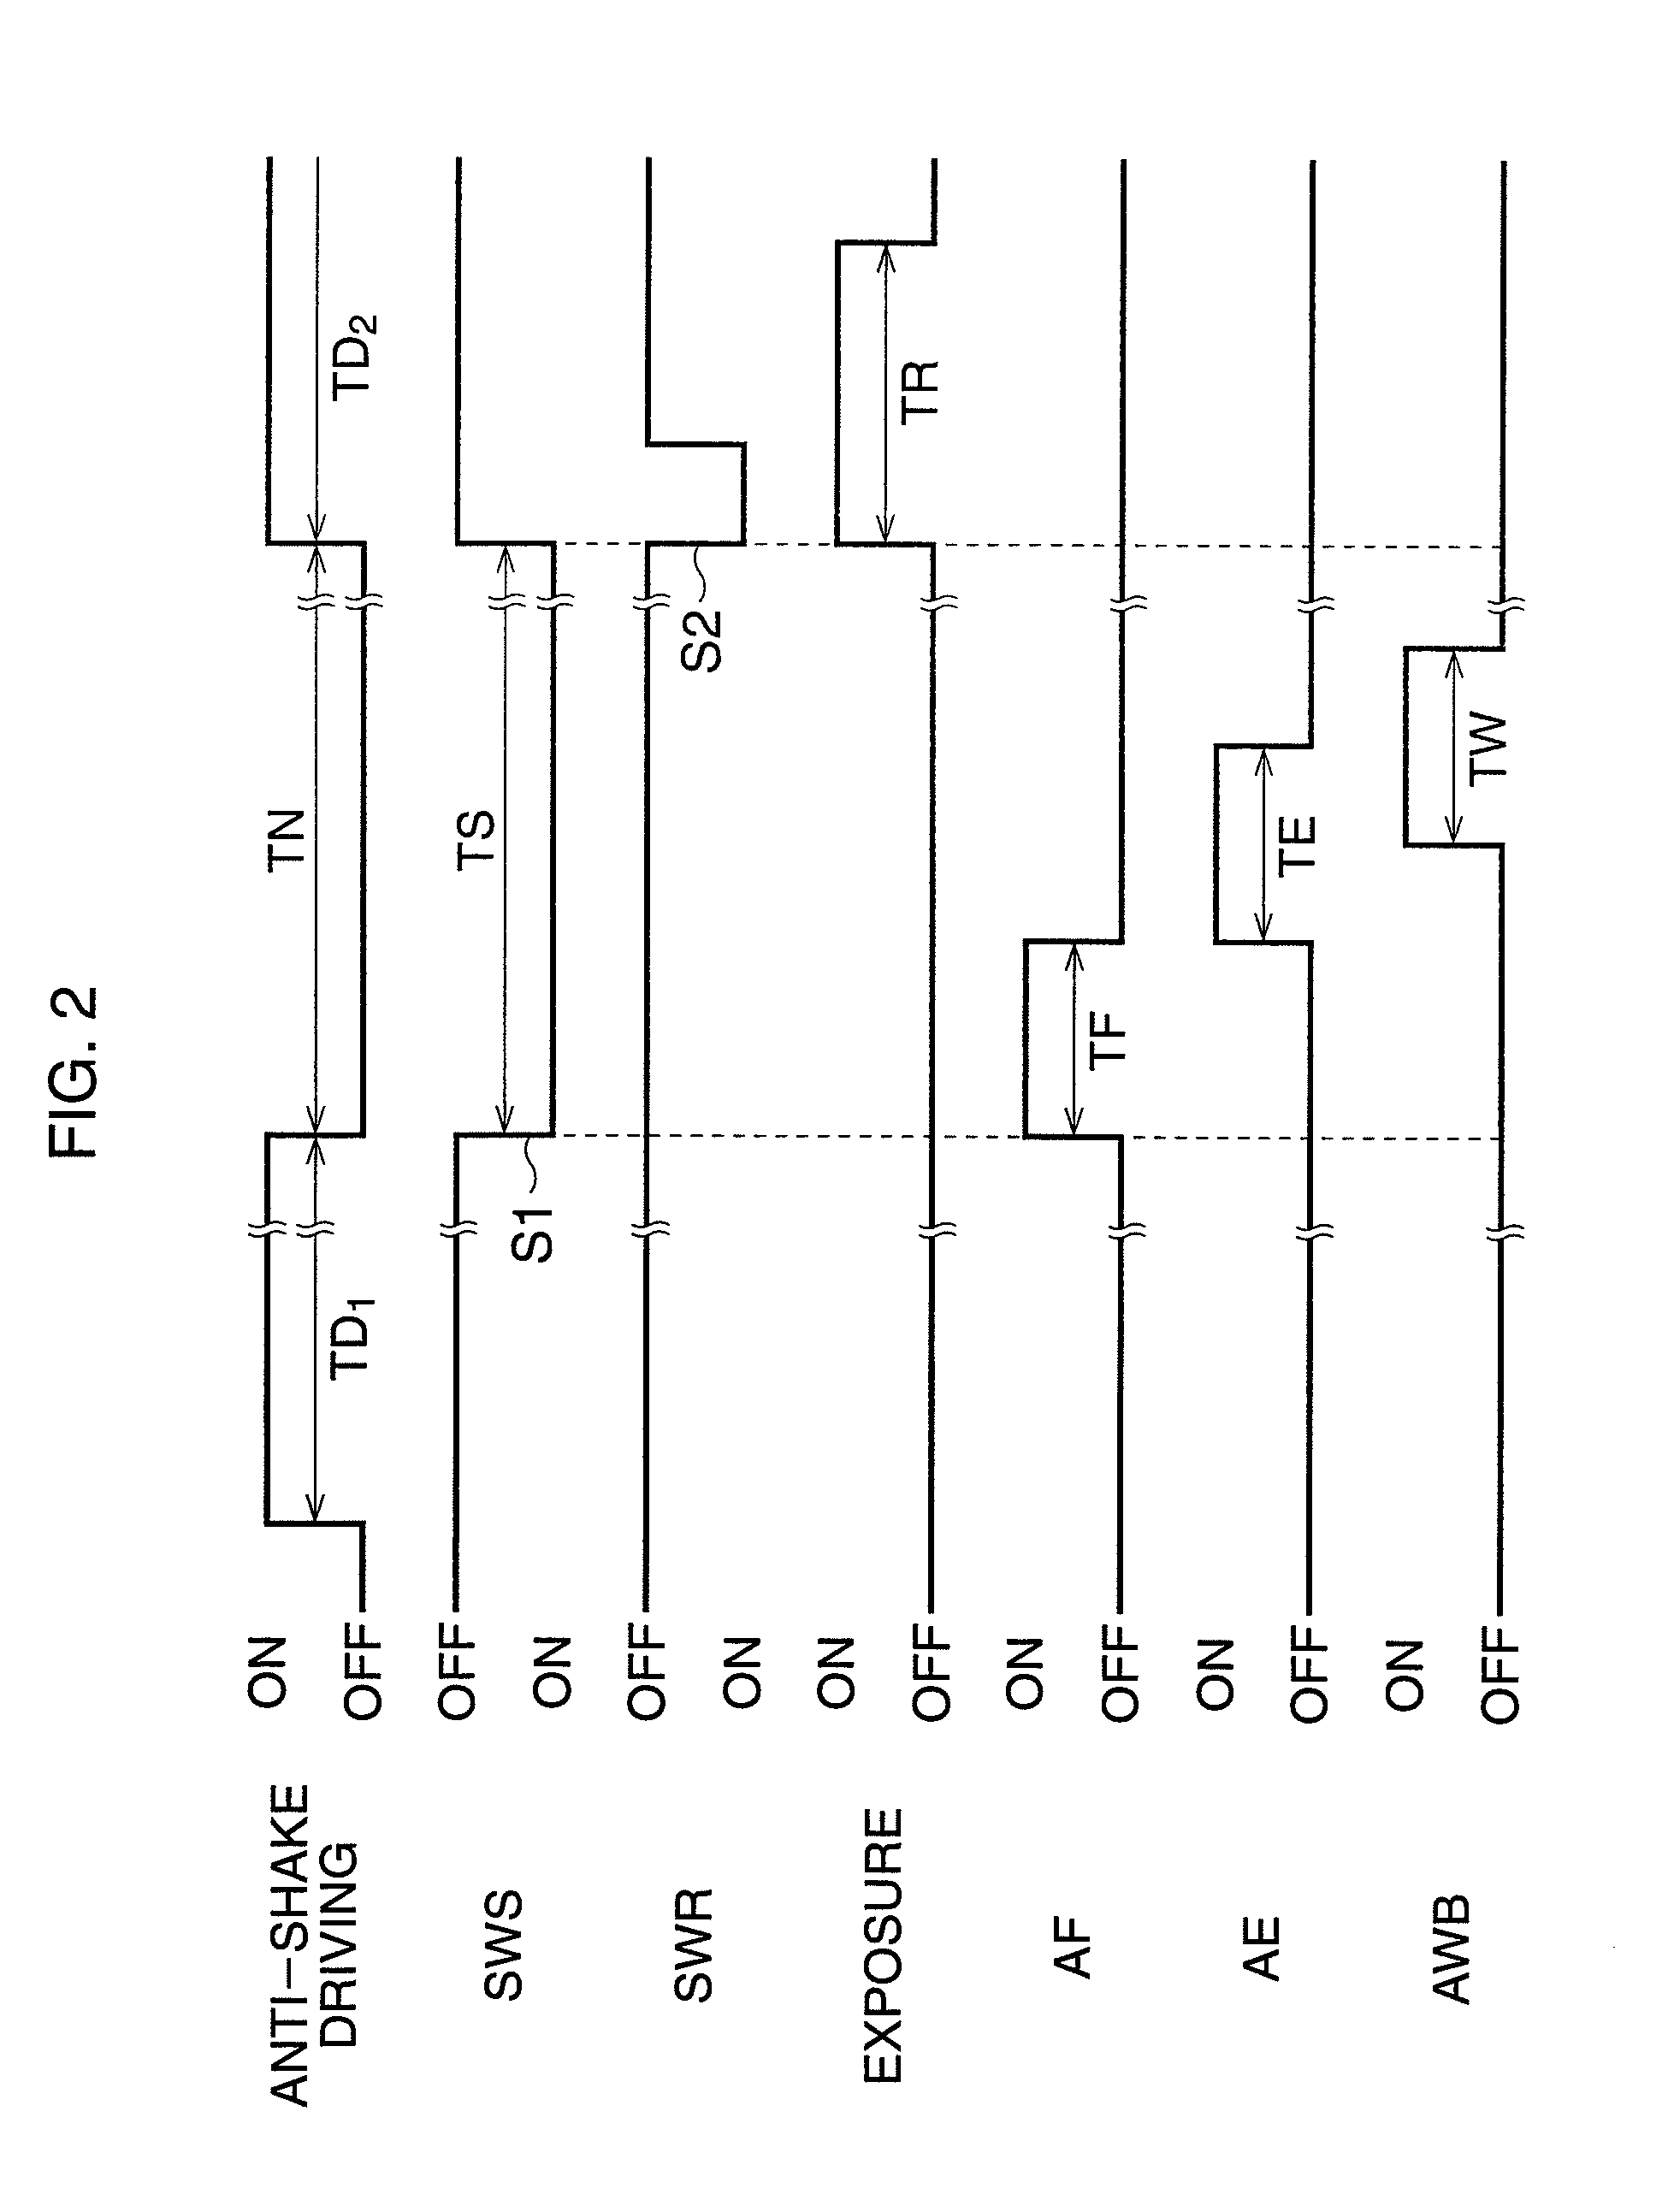 Photographic device with anti-shake function